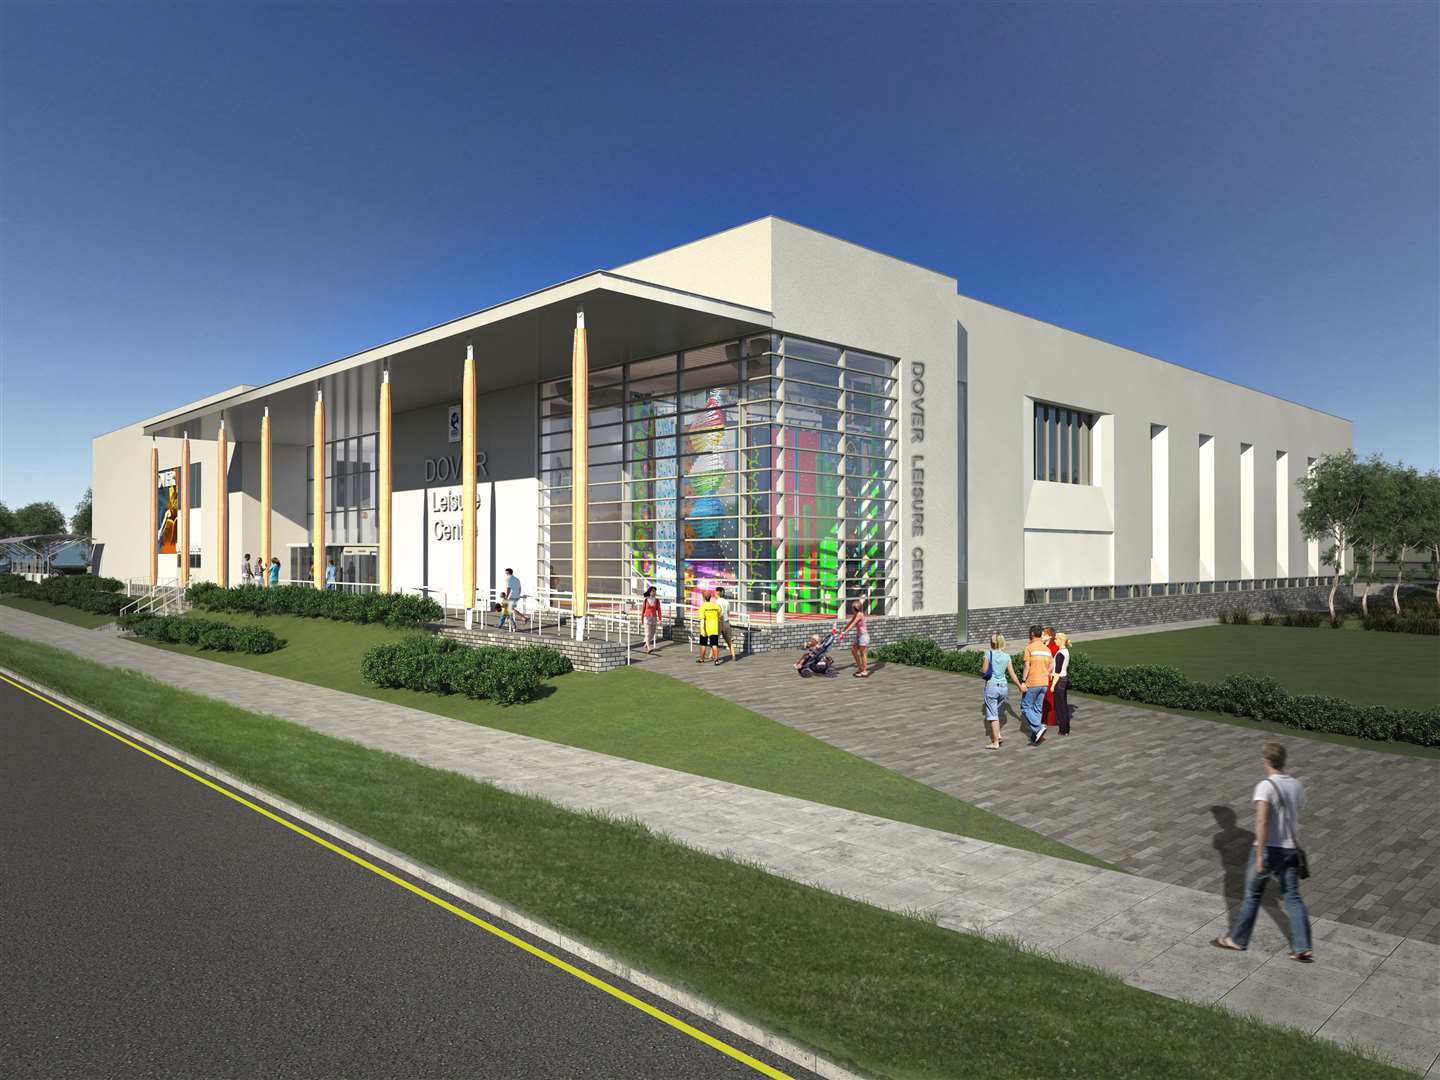 KMG GROUP USE ONLYConditions of Use: Slug: SUBTLE DO 300317Caption: Artist's impression of the exterior of the planned new Dove leisure centre.Location: DoverCategory: ConstructionByline: Dover District CouncilContact Name: Kevin CharlesContact Email: pr@dover.gov.ukContact Phone: 01304 872020Uploaded By: Sam LENNONCopyright: Dover District CouncilOriginal Caption: FM4725040 (3209151)